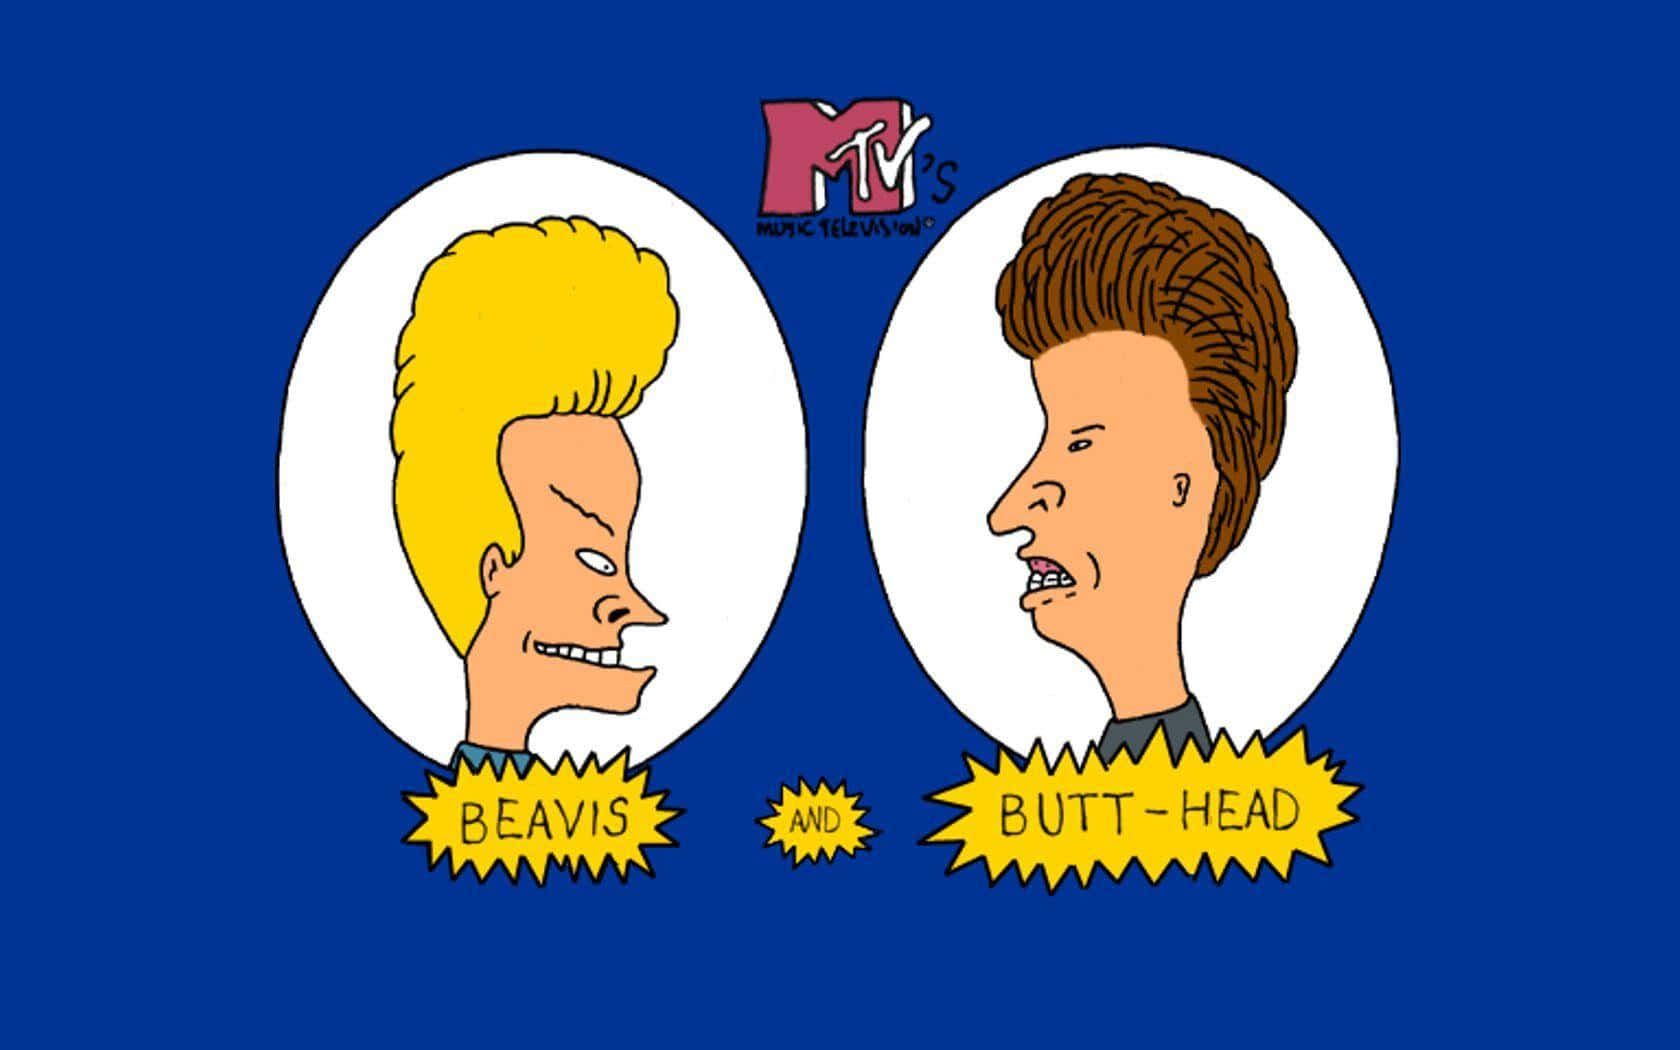 Beavis And Butthead Have their Eye on You